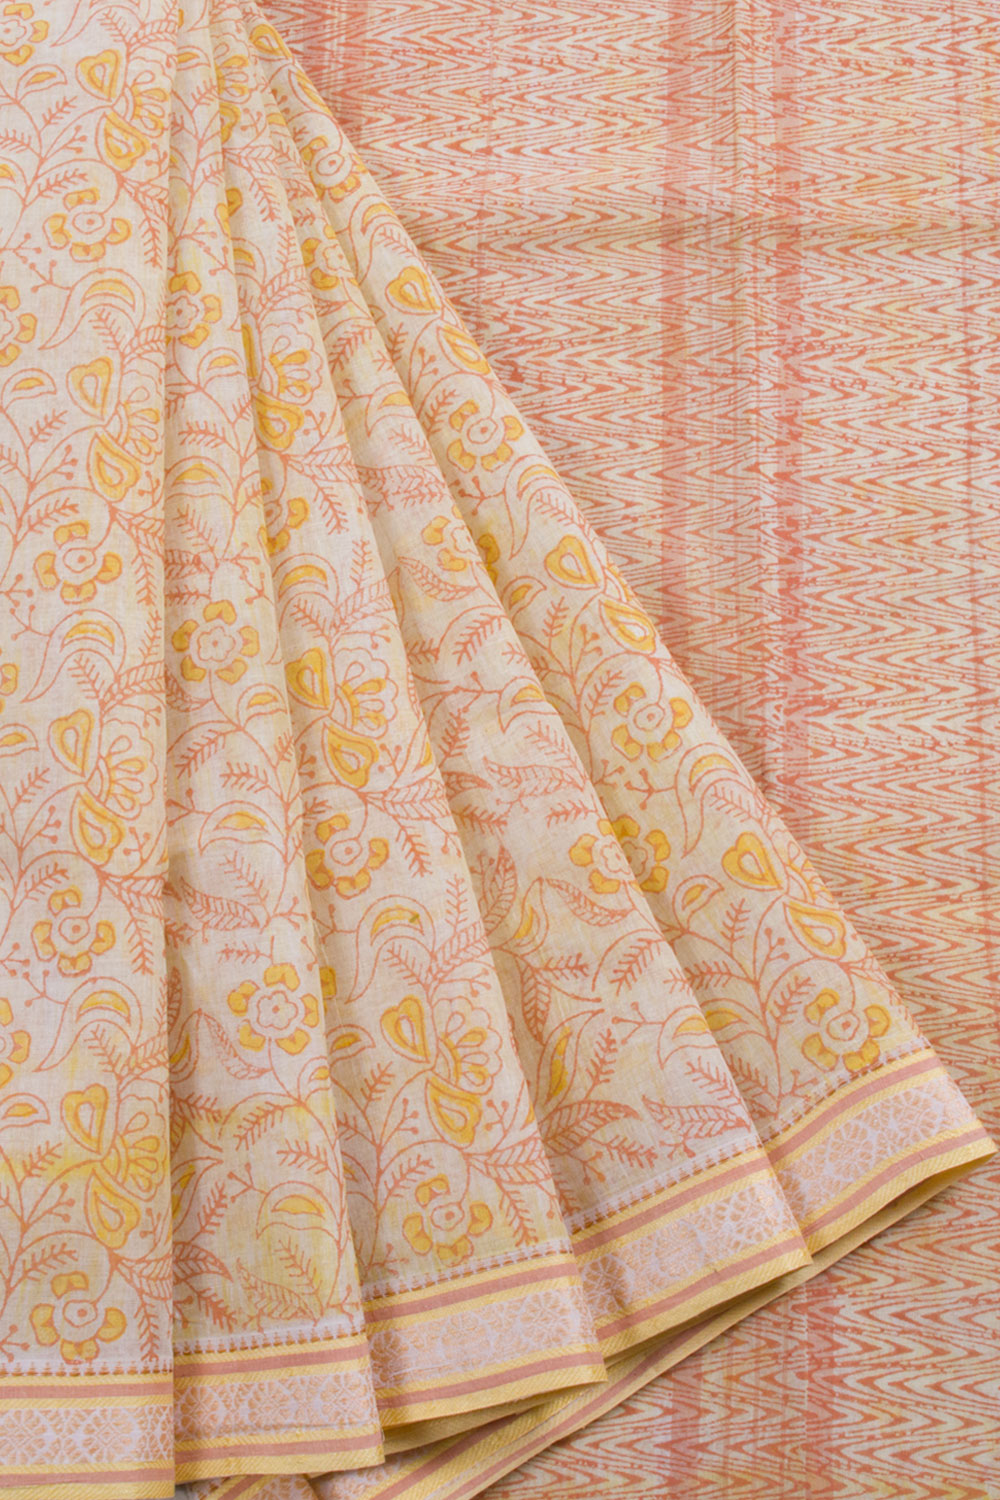 Hand Block Printed Cotton Saree with Floral Motifs and Without Blouse